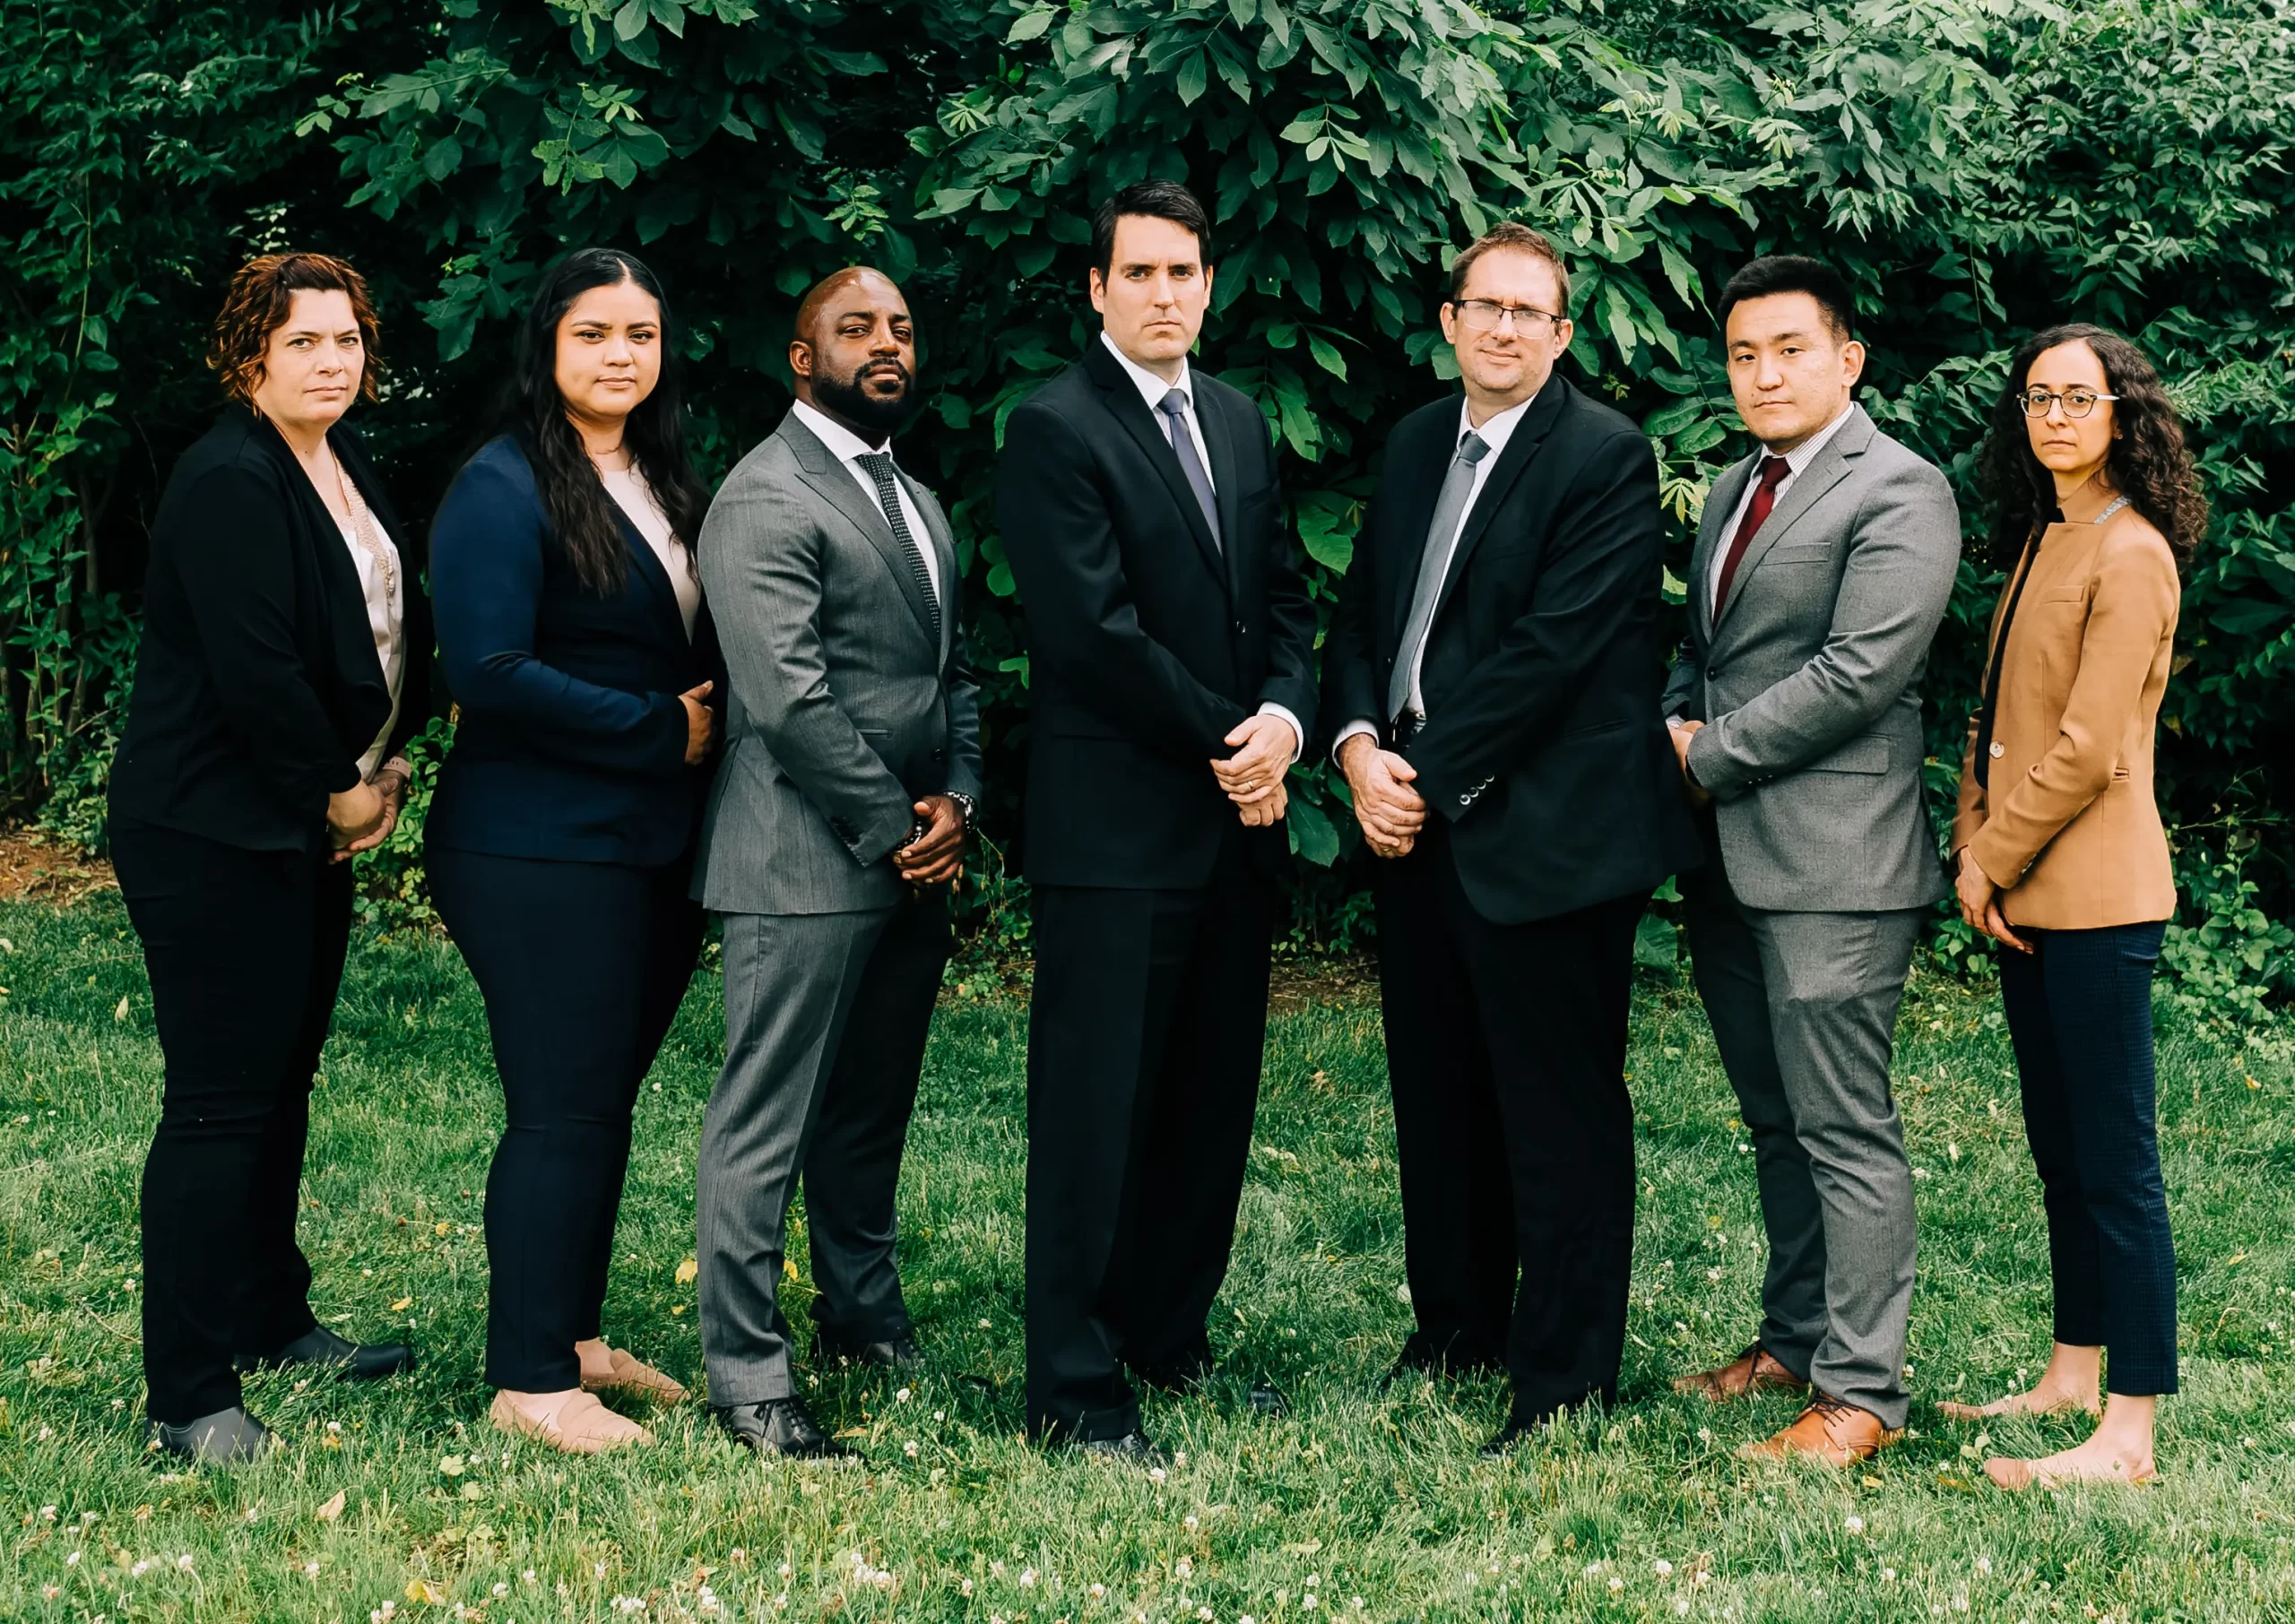 A group photo of the criminal defense team at Cornerstone. There are 2 paralegals and 5 attorneys.